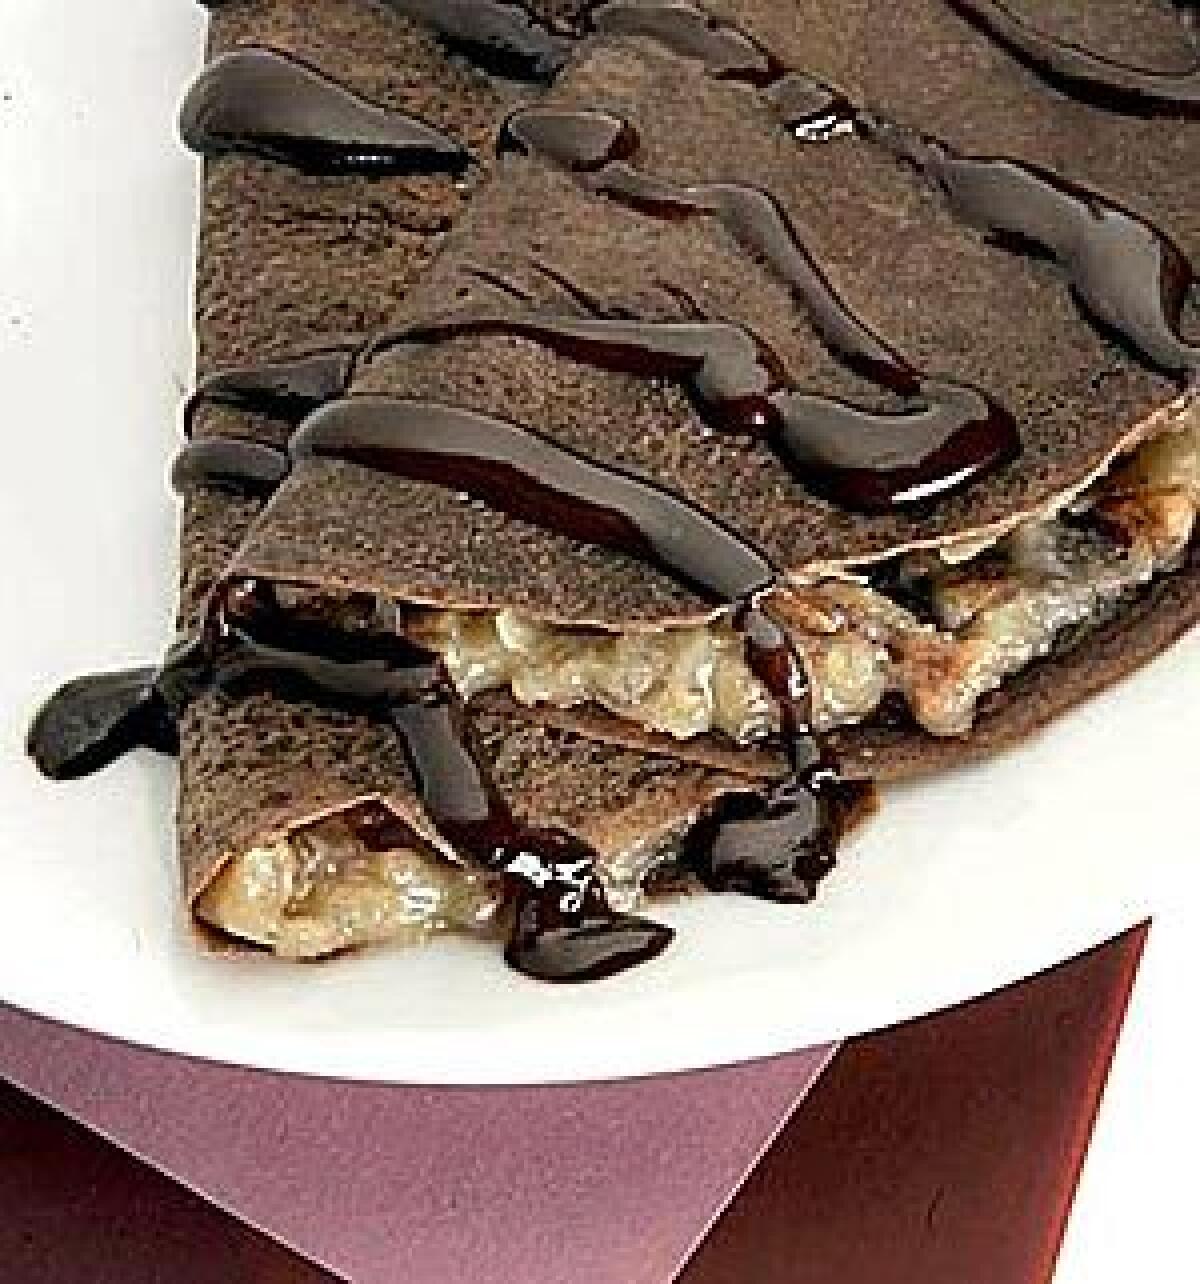 The crepes themselves are made with melted chocolate, enfold the custard filling, then topped with just a drizzle of melted chocolate and cream.